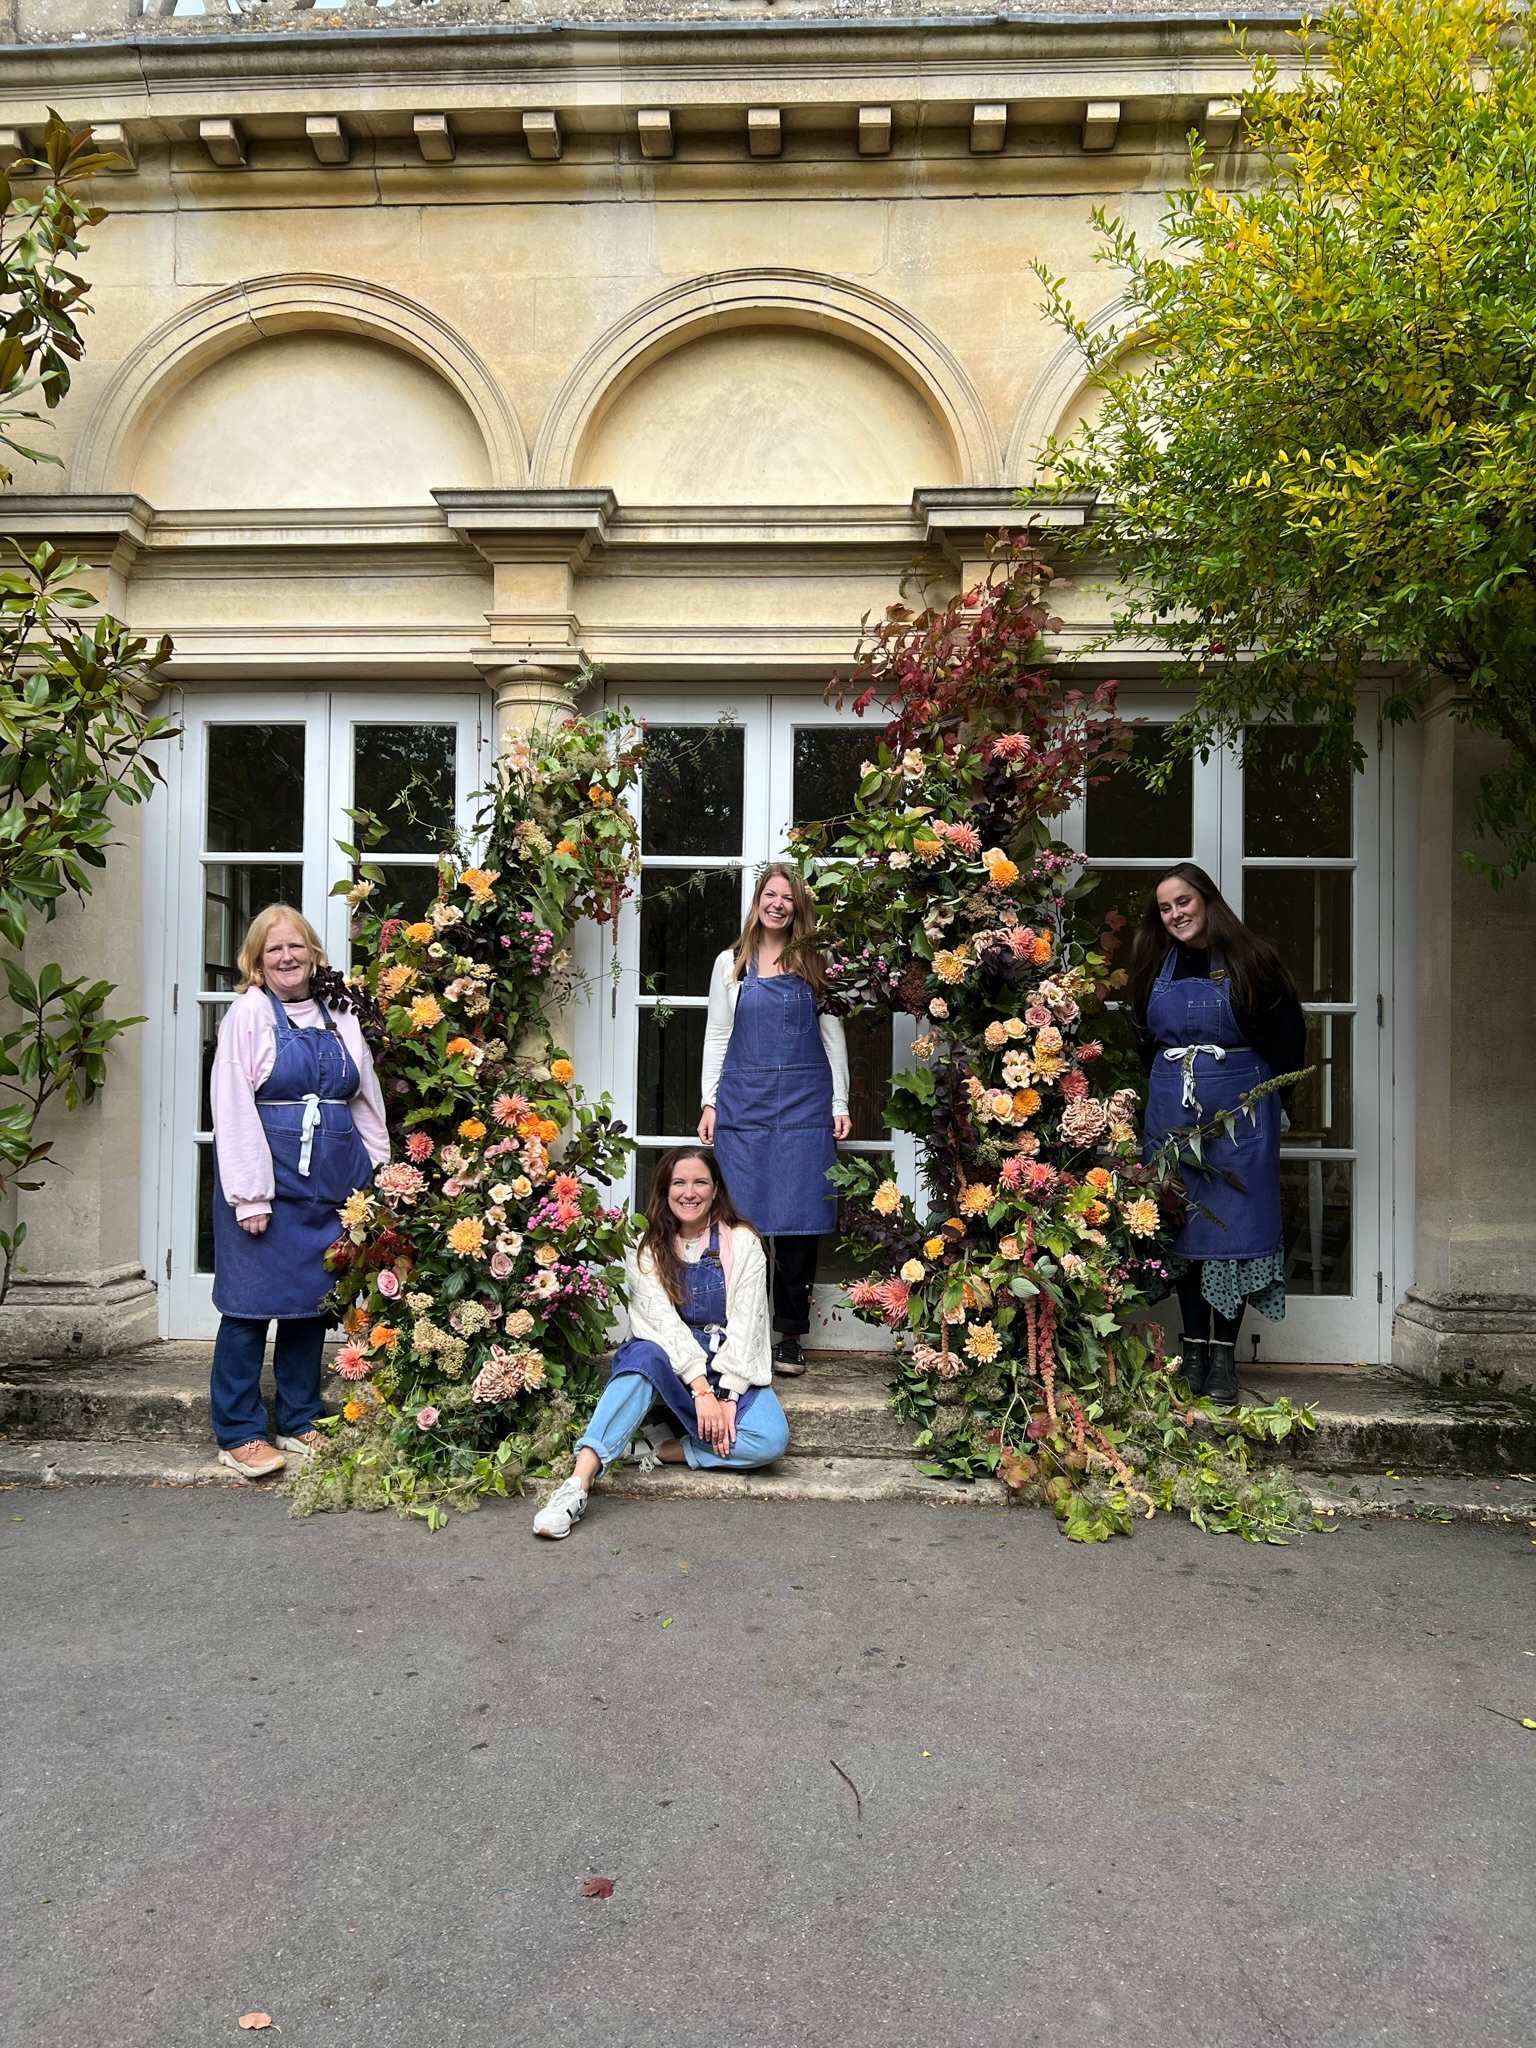 Wedding flowers course students in front of their floral installation